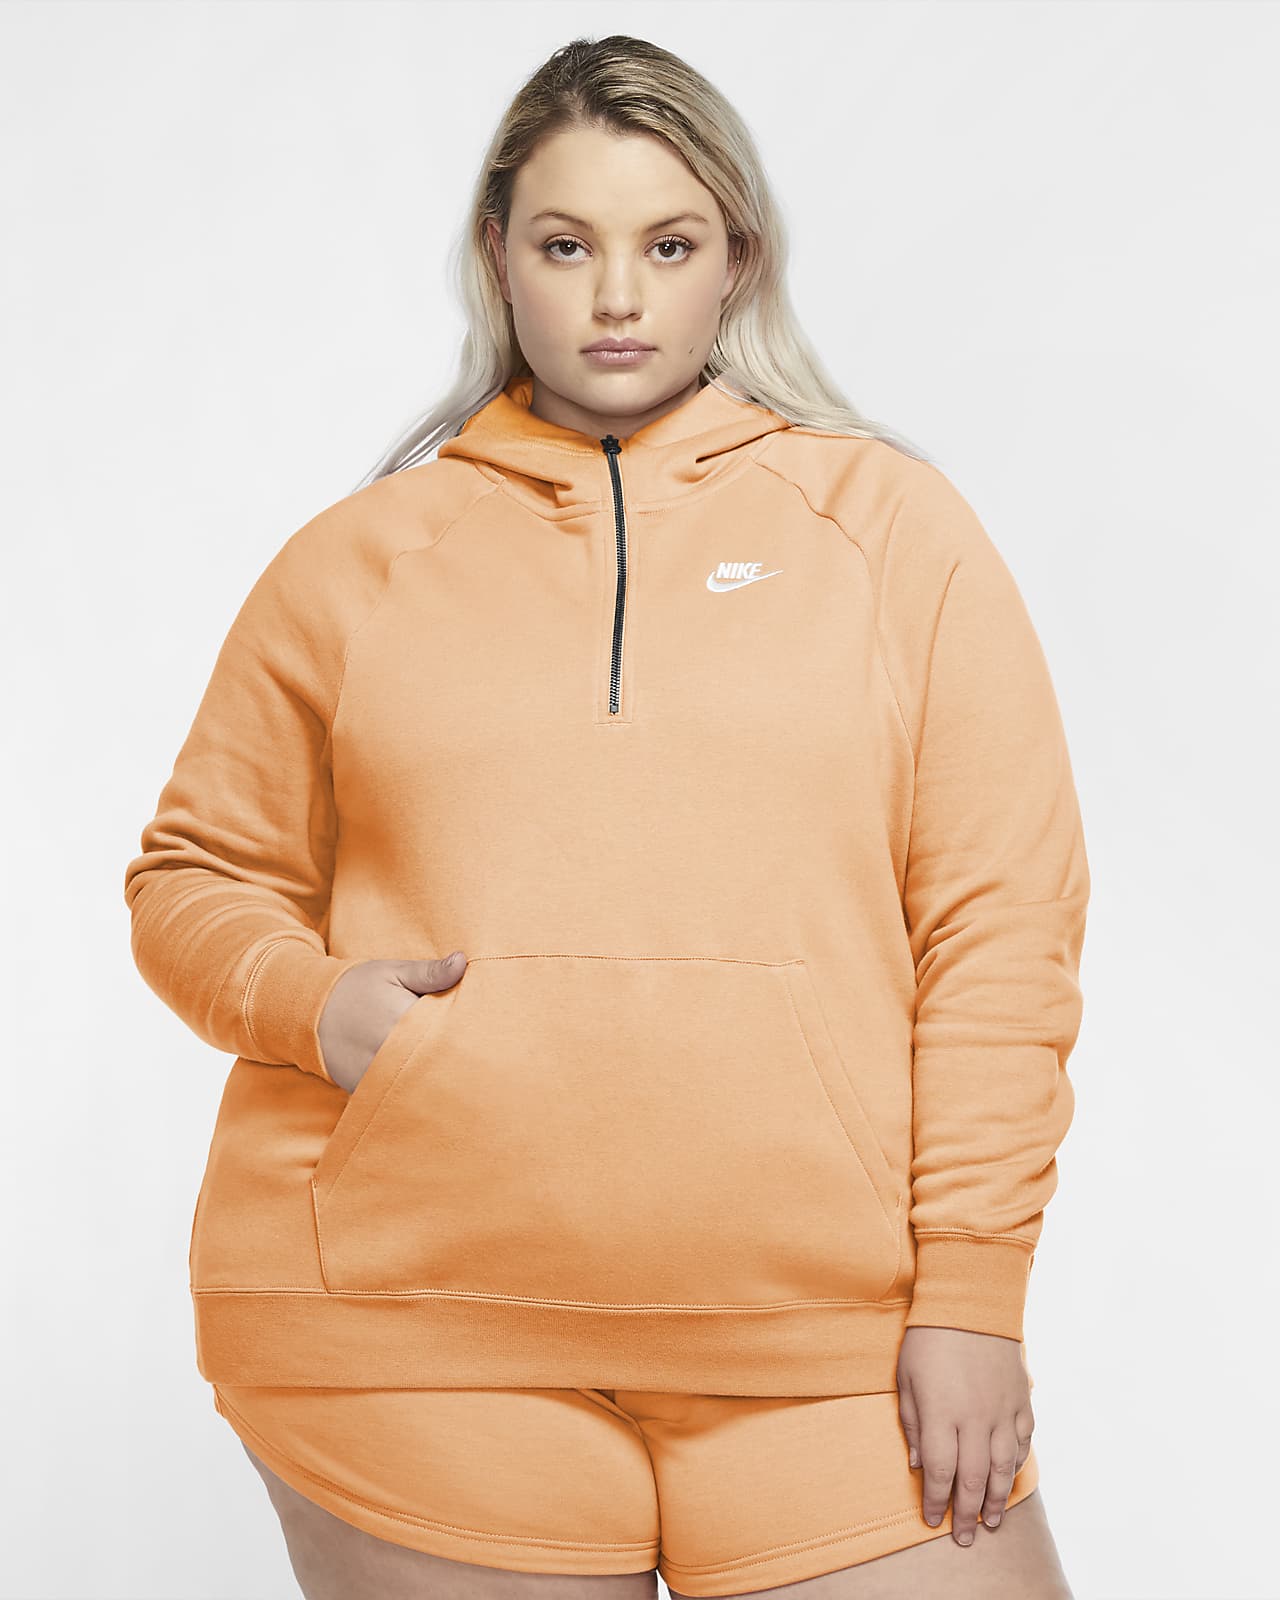 yellow hoodie plus size